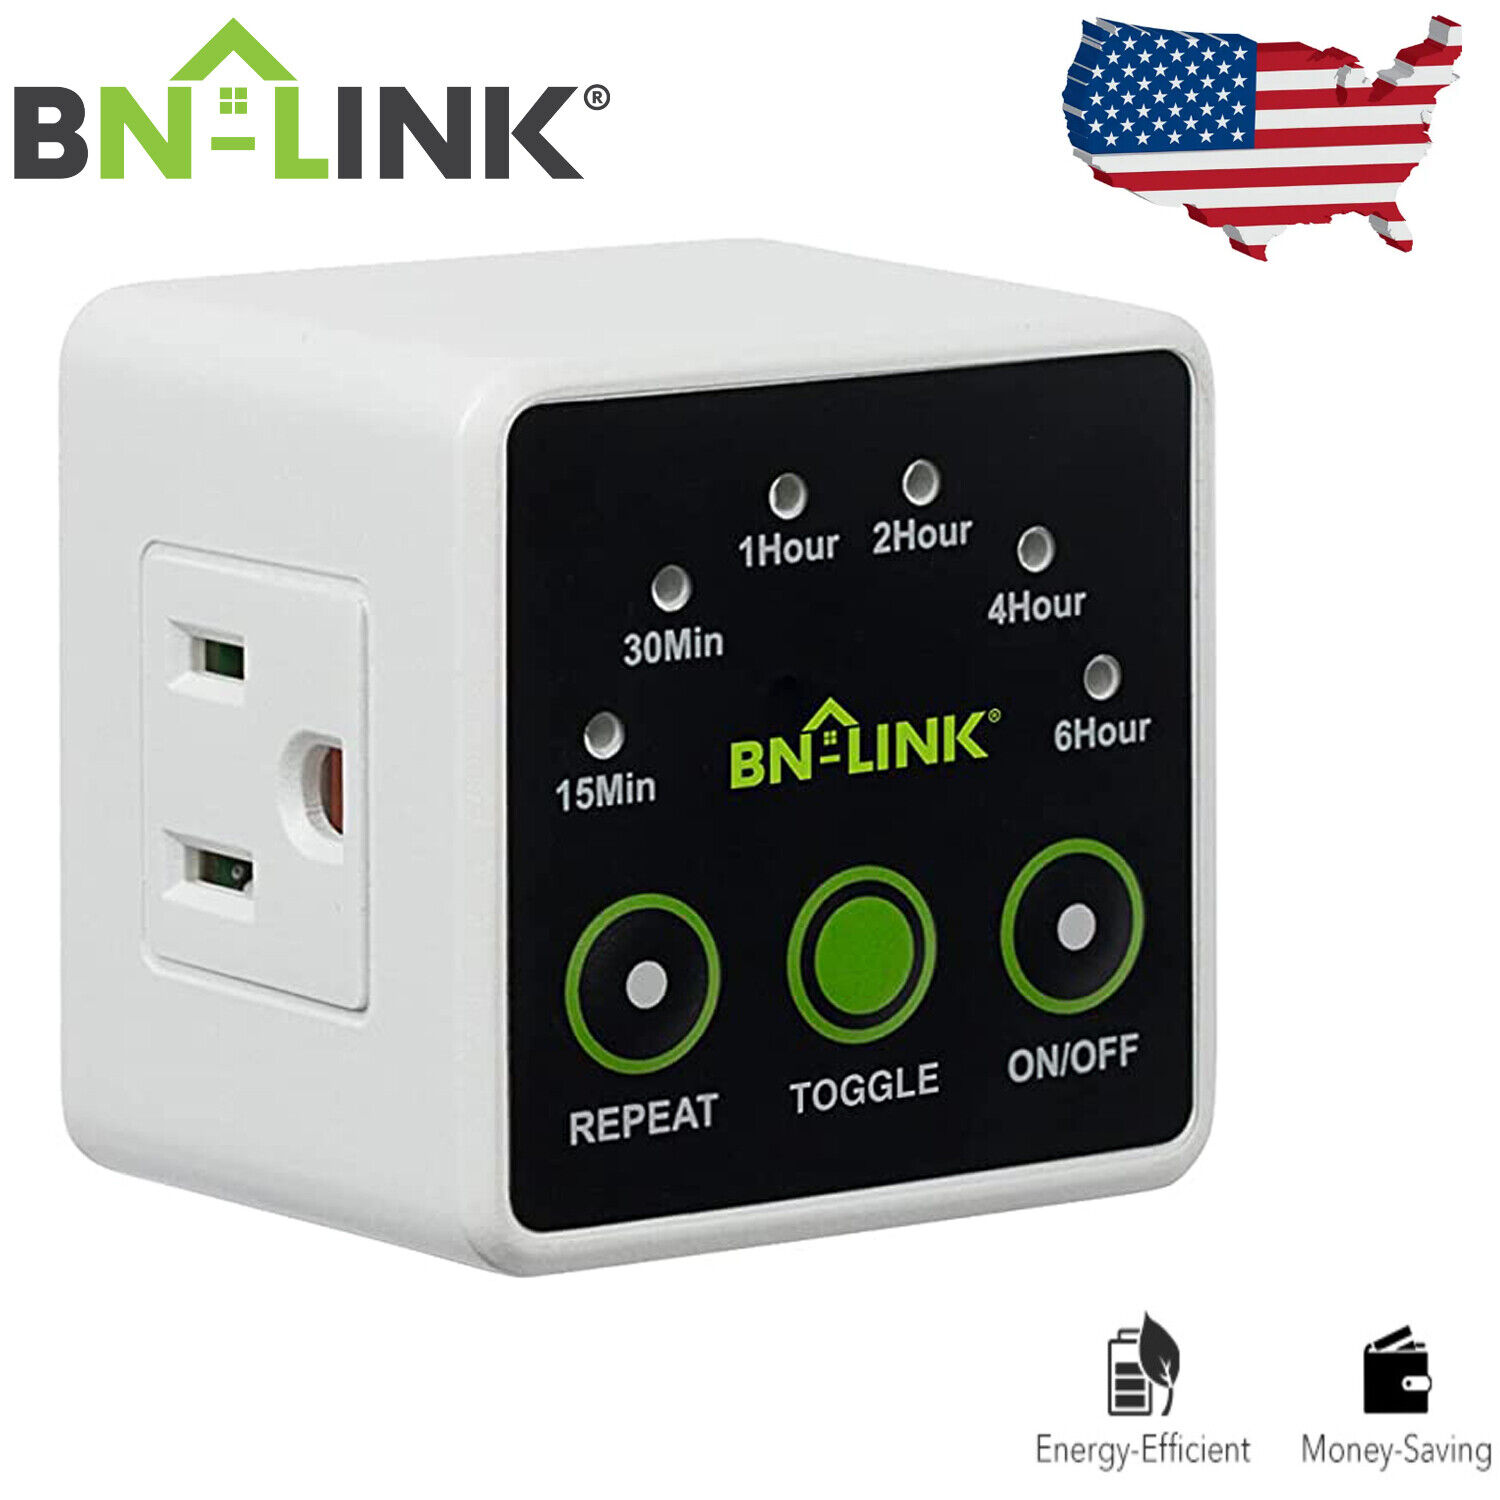 BN-LINK Smart Digital Countdown Timer with 3-Prong Grounded Outlet 125V AC 15A